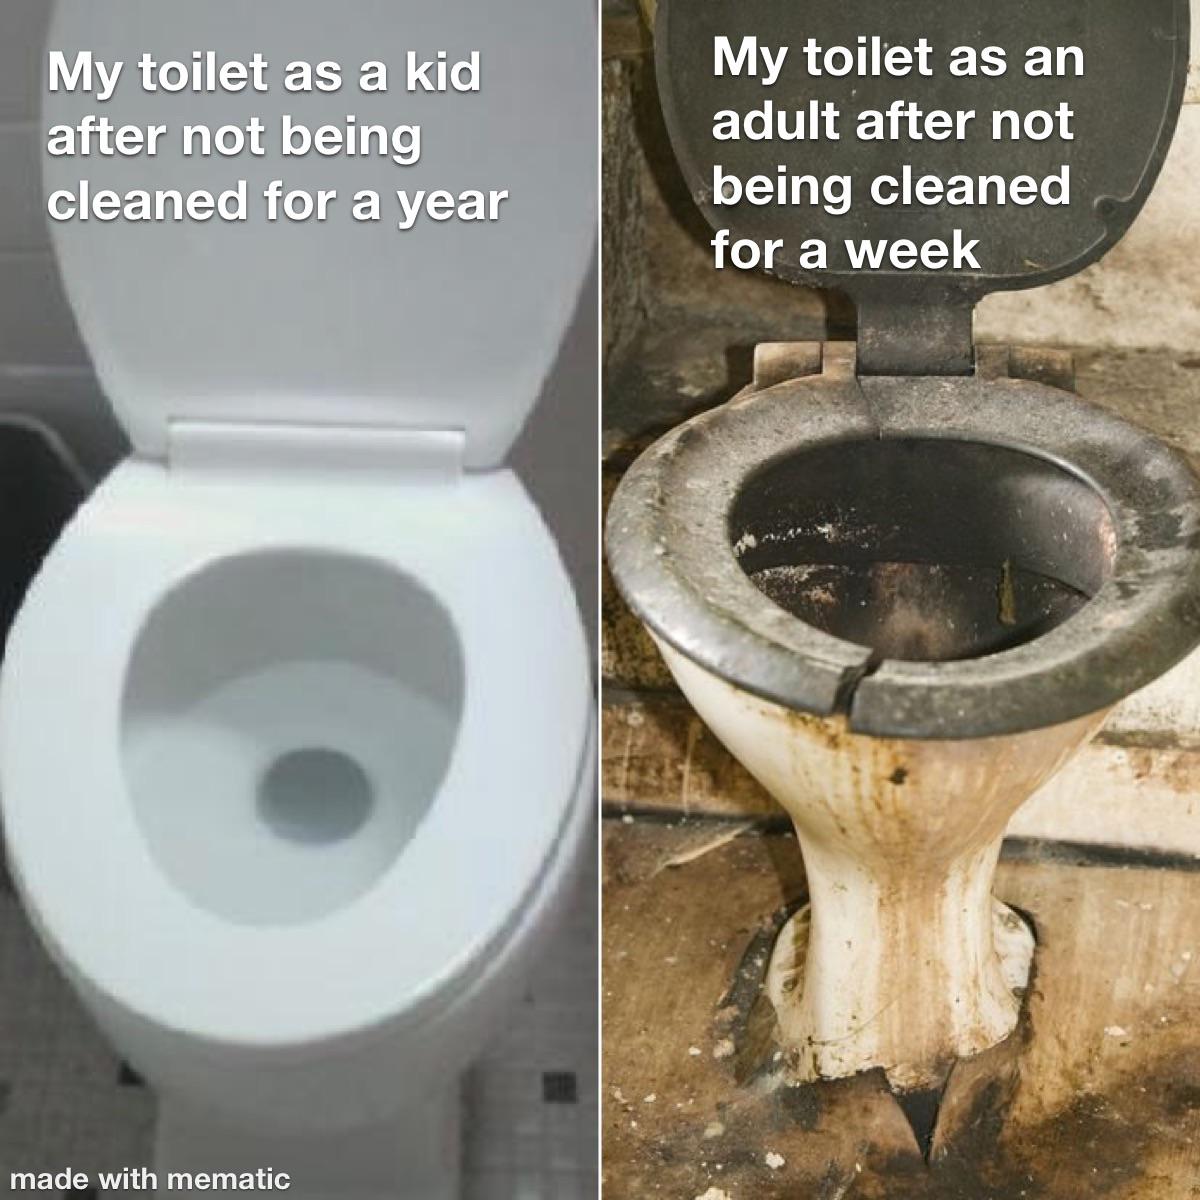 toilet - My toilet as a kid after not being cleaned for a year My toilet as an adult after not being cleaned for a week made with mematic